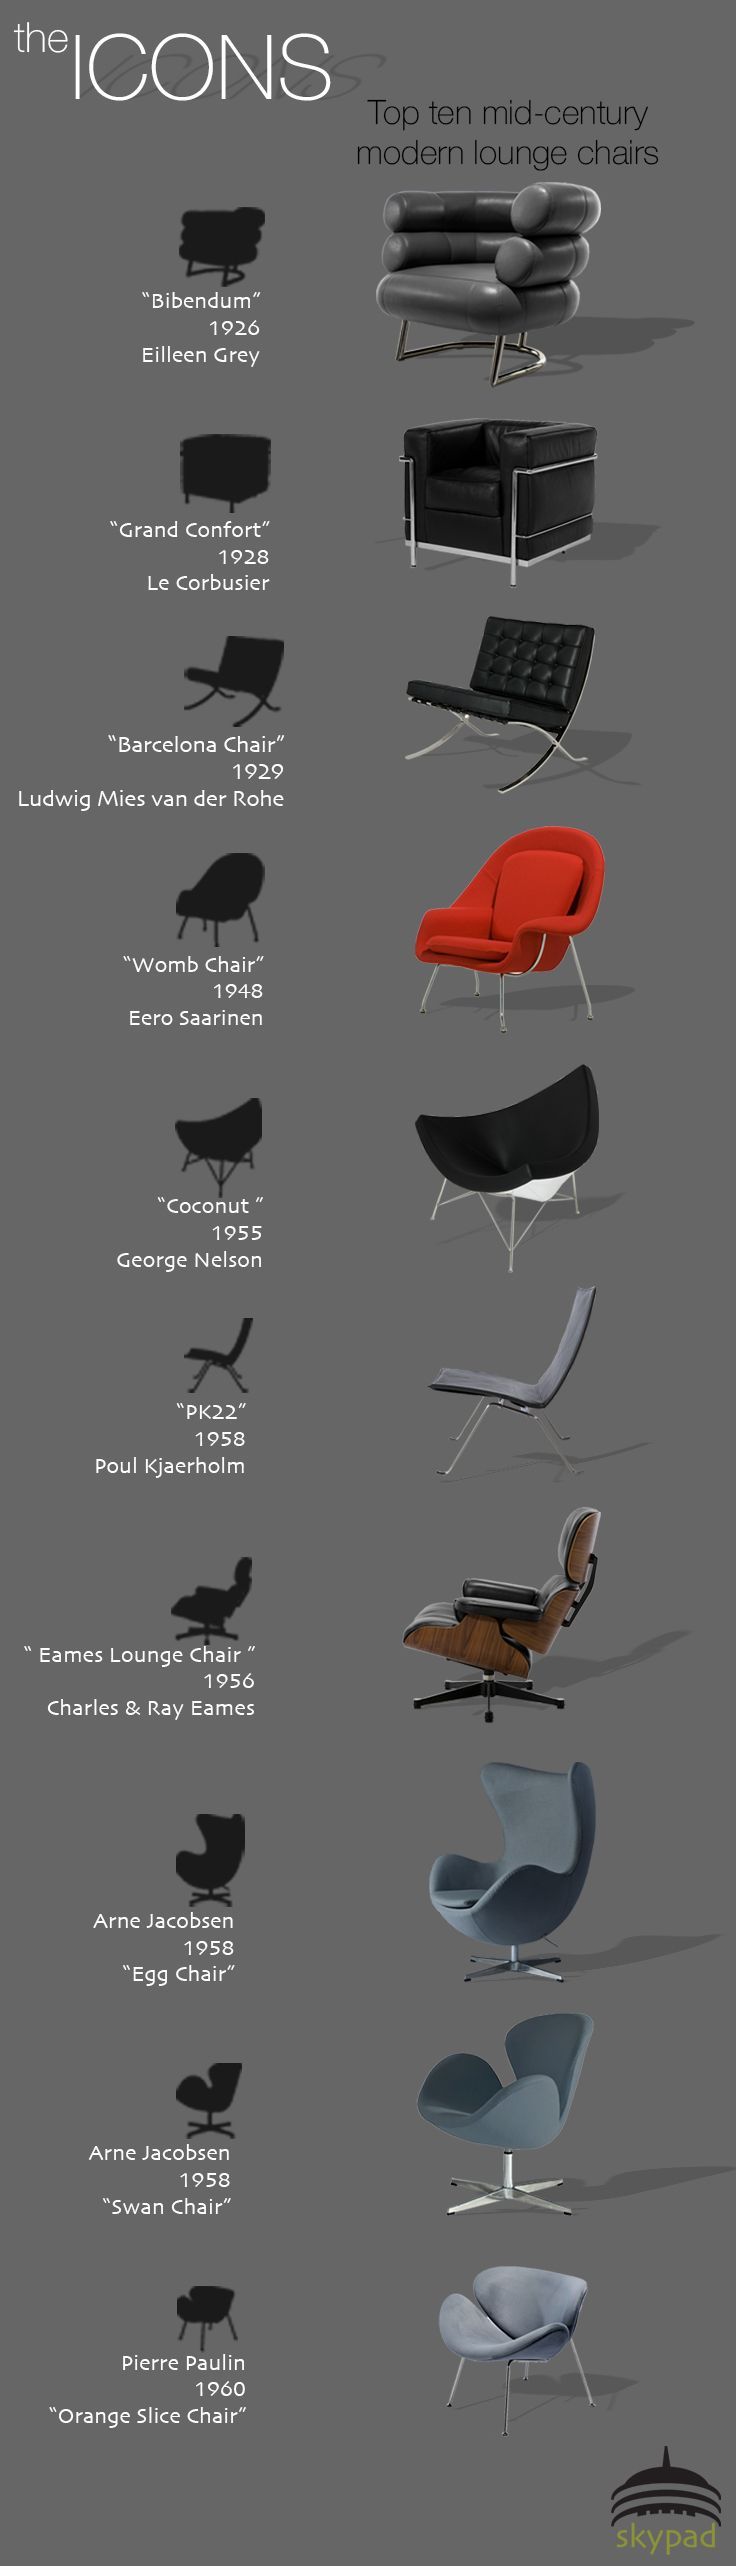 The ICONS: Top Ten Mid-Century Modern Lounge Chairs